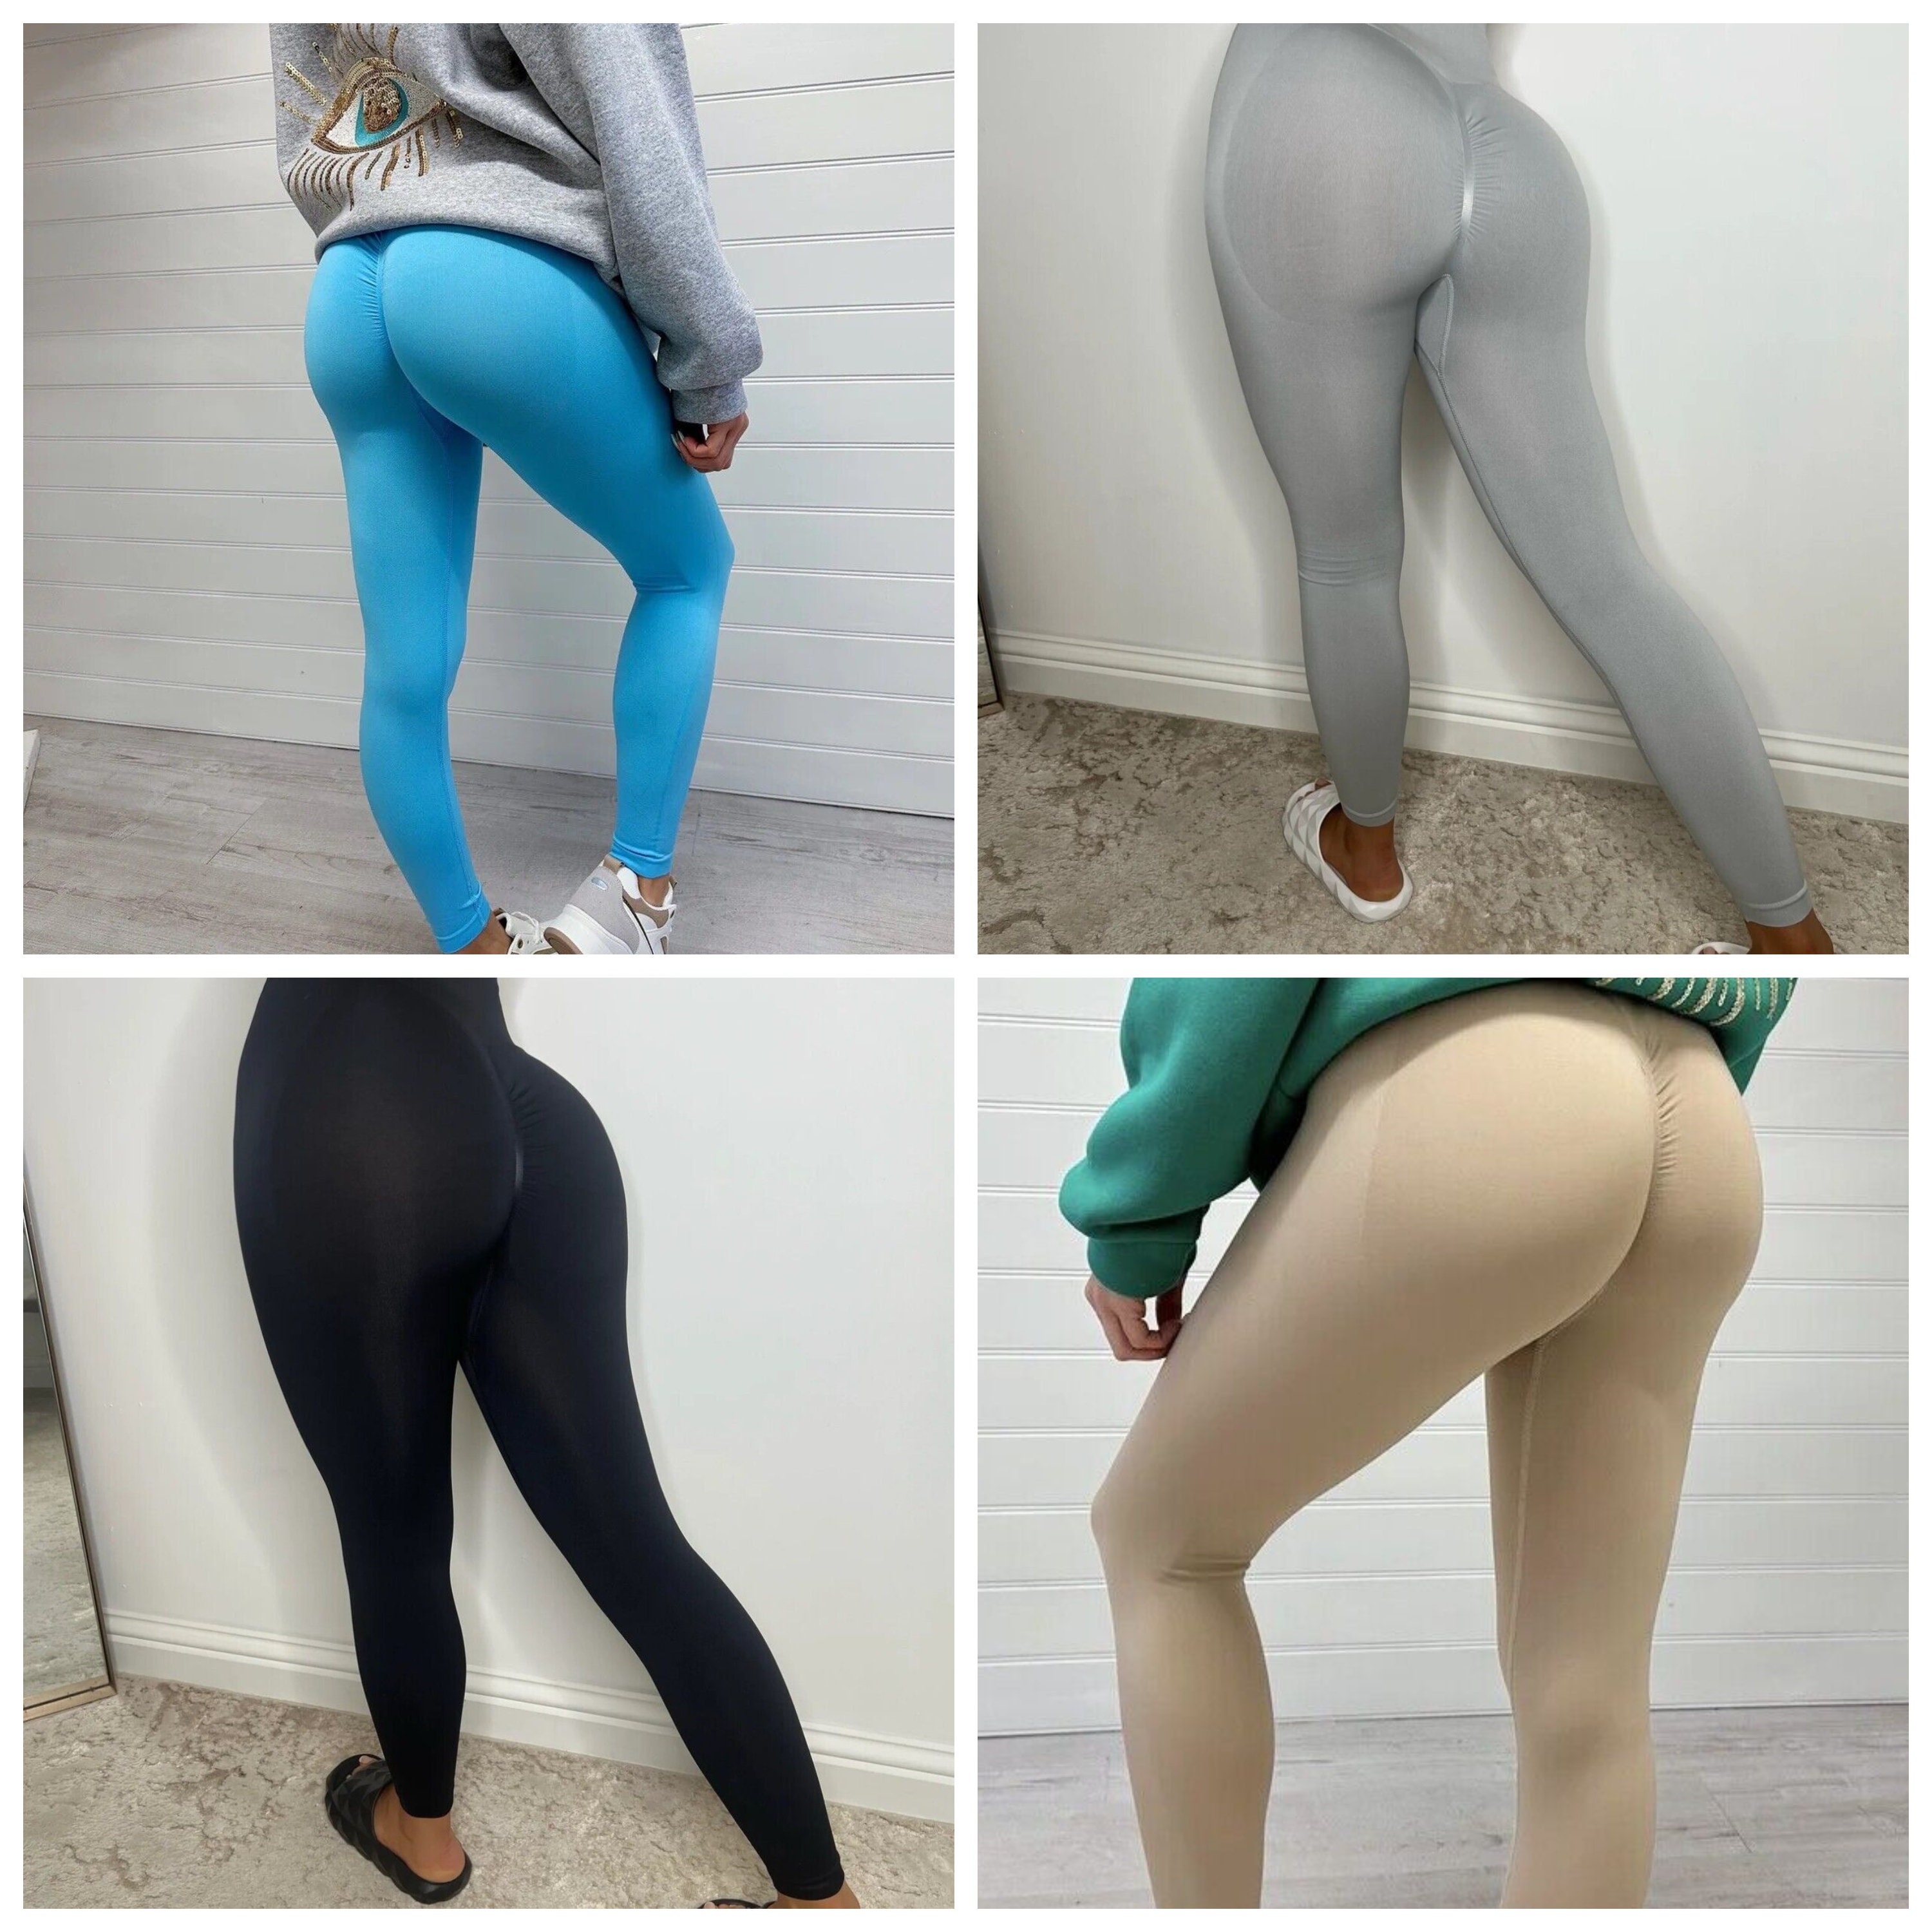 beth knittel recommends yoga pants ass worship pic